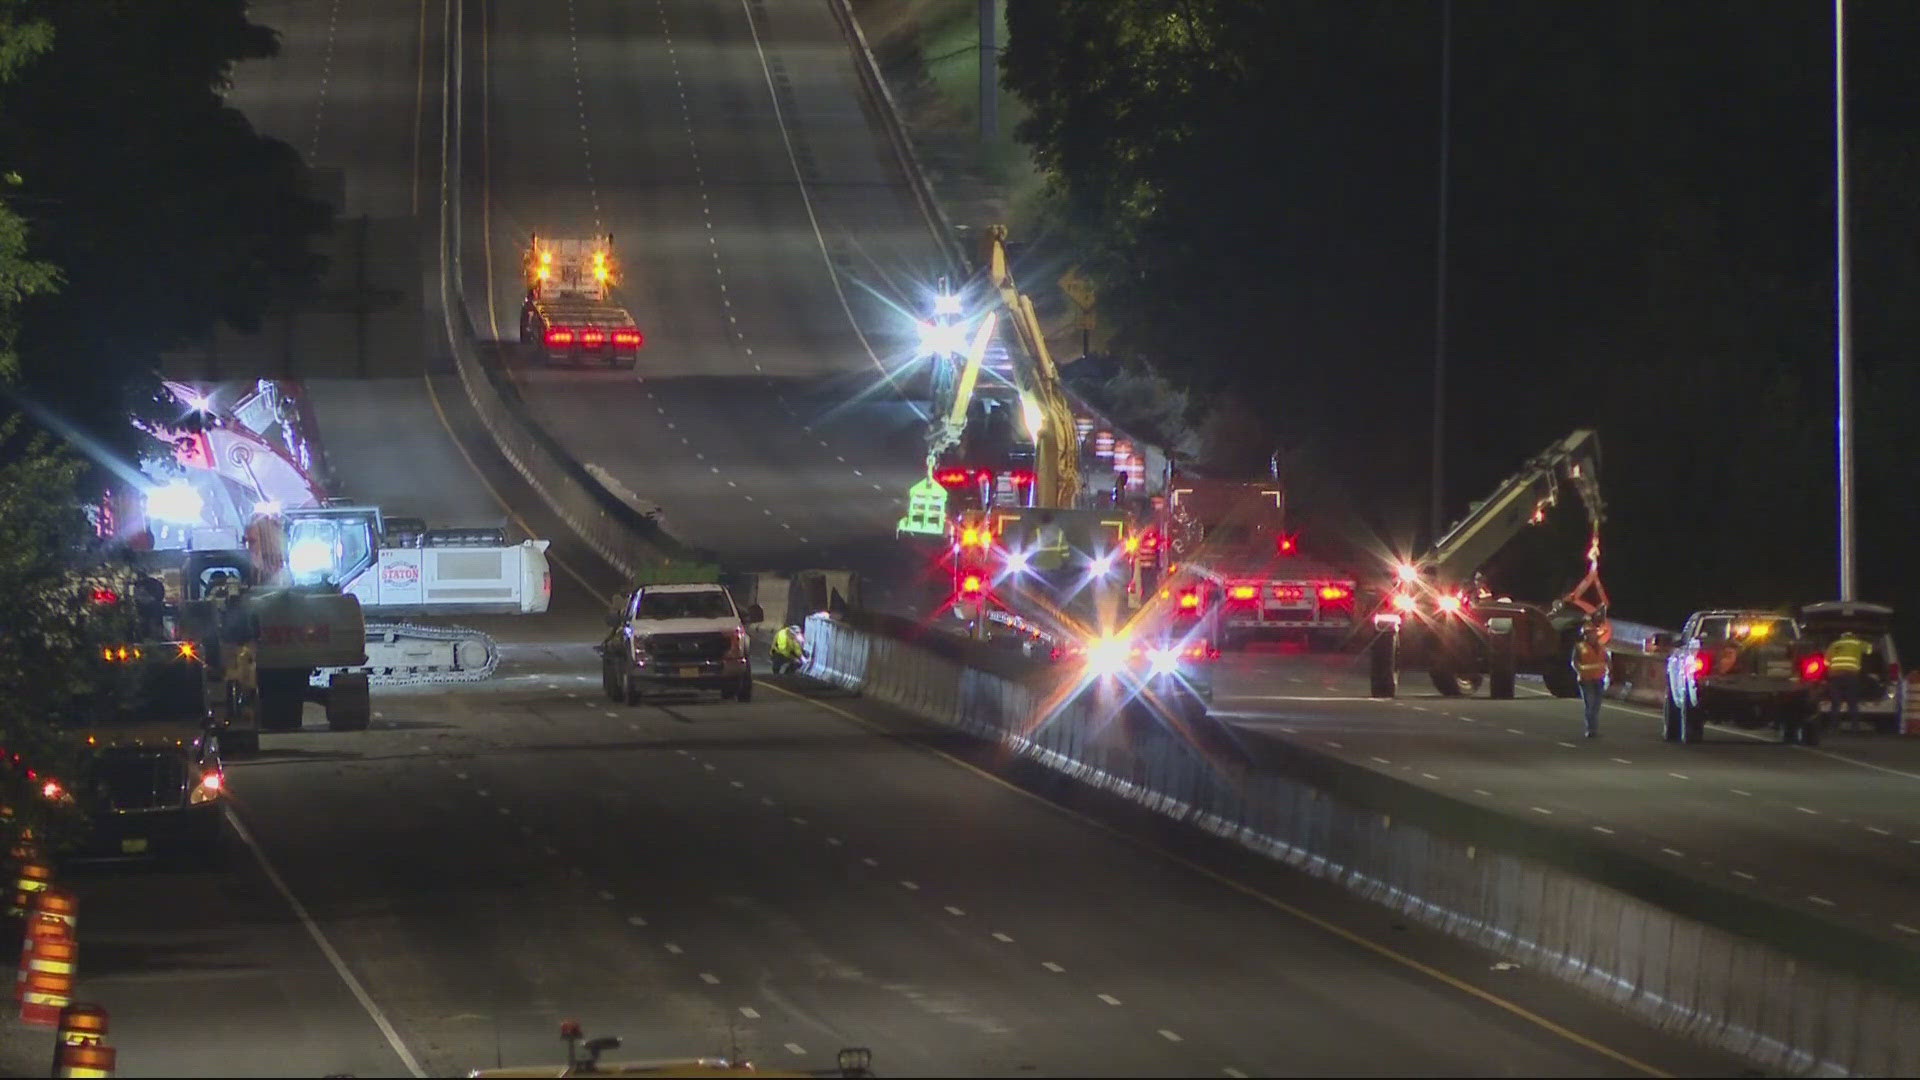 Interstate 5 north and south closed between Terwilliger Boulevard and Capital Highway, as well as several onramps, to repair a freeway overpass.